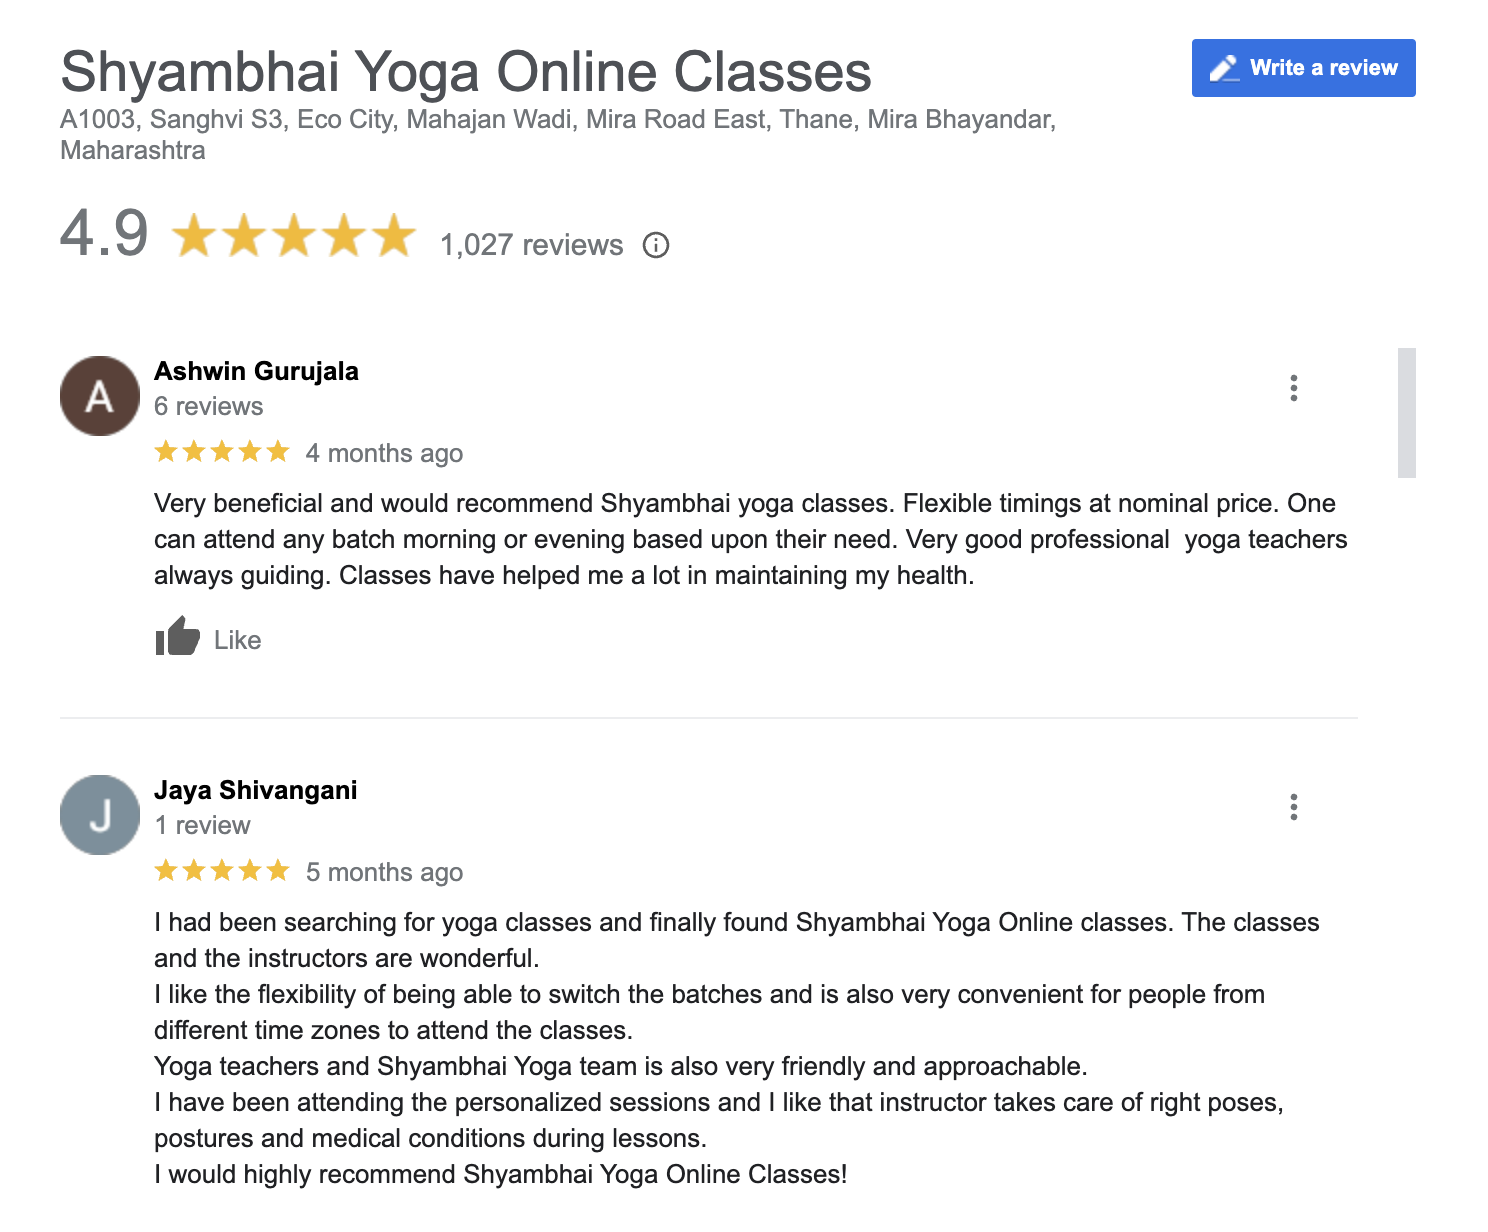 One to one online yoga classes reviews